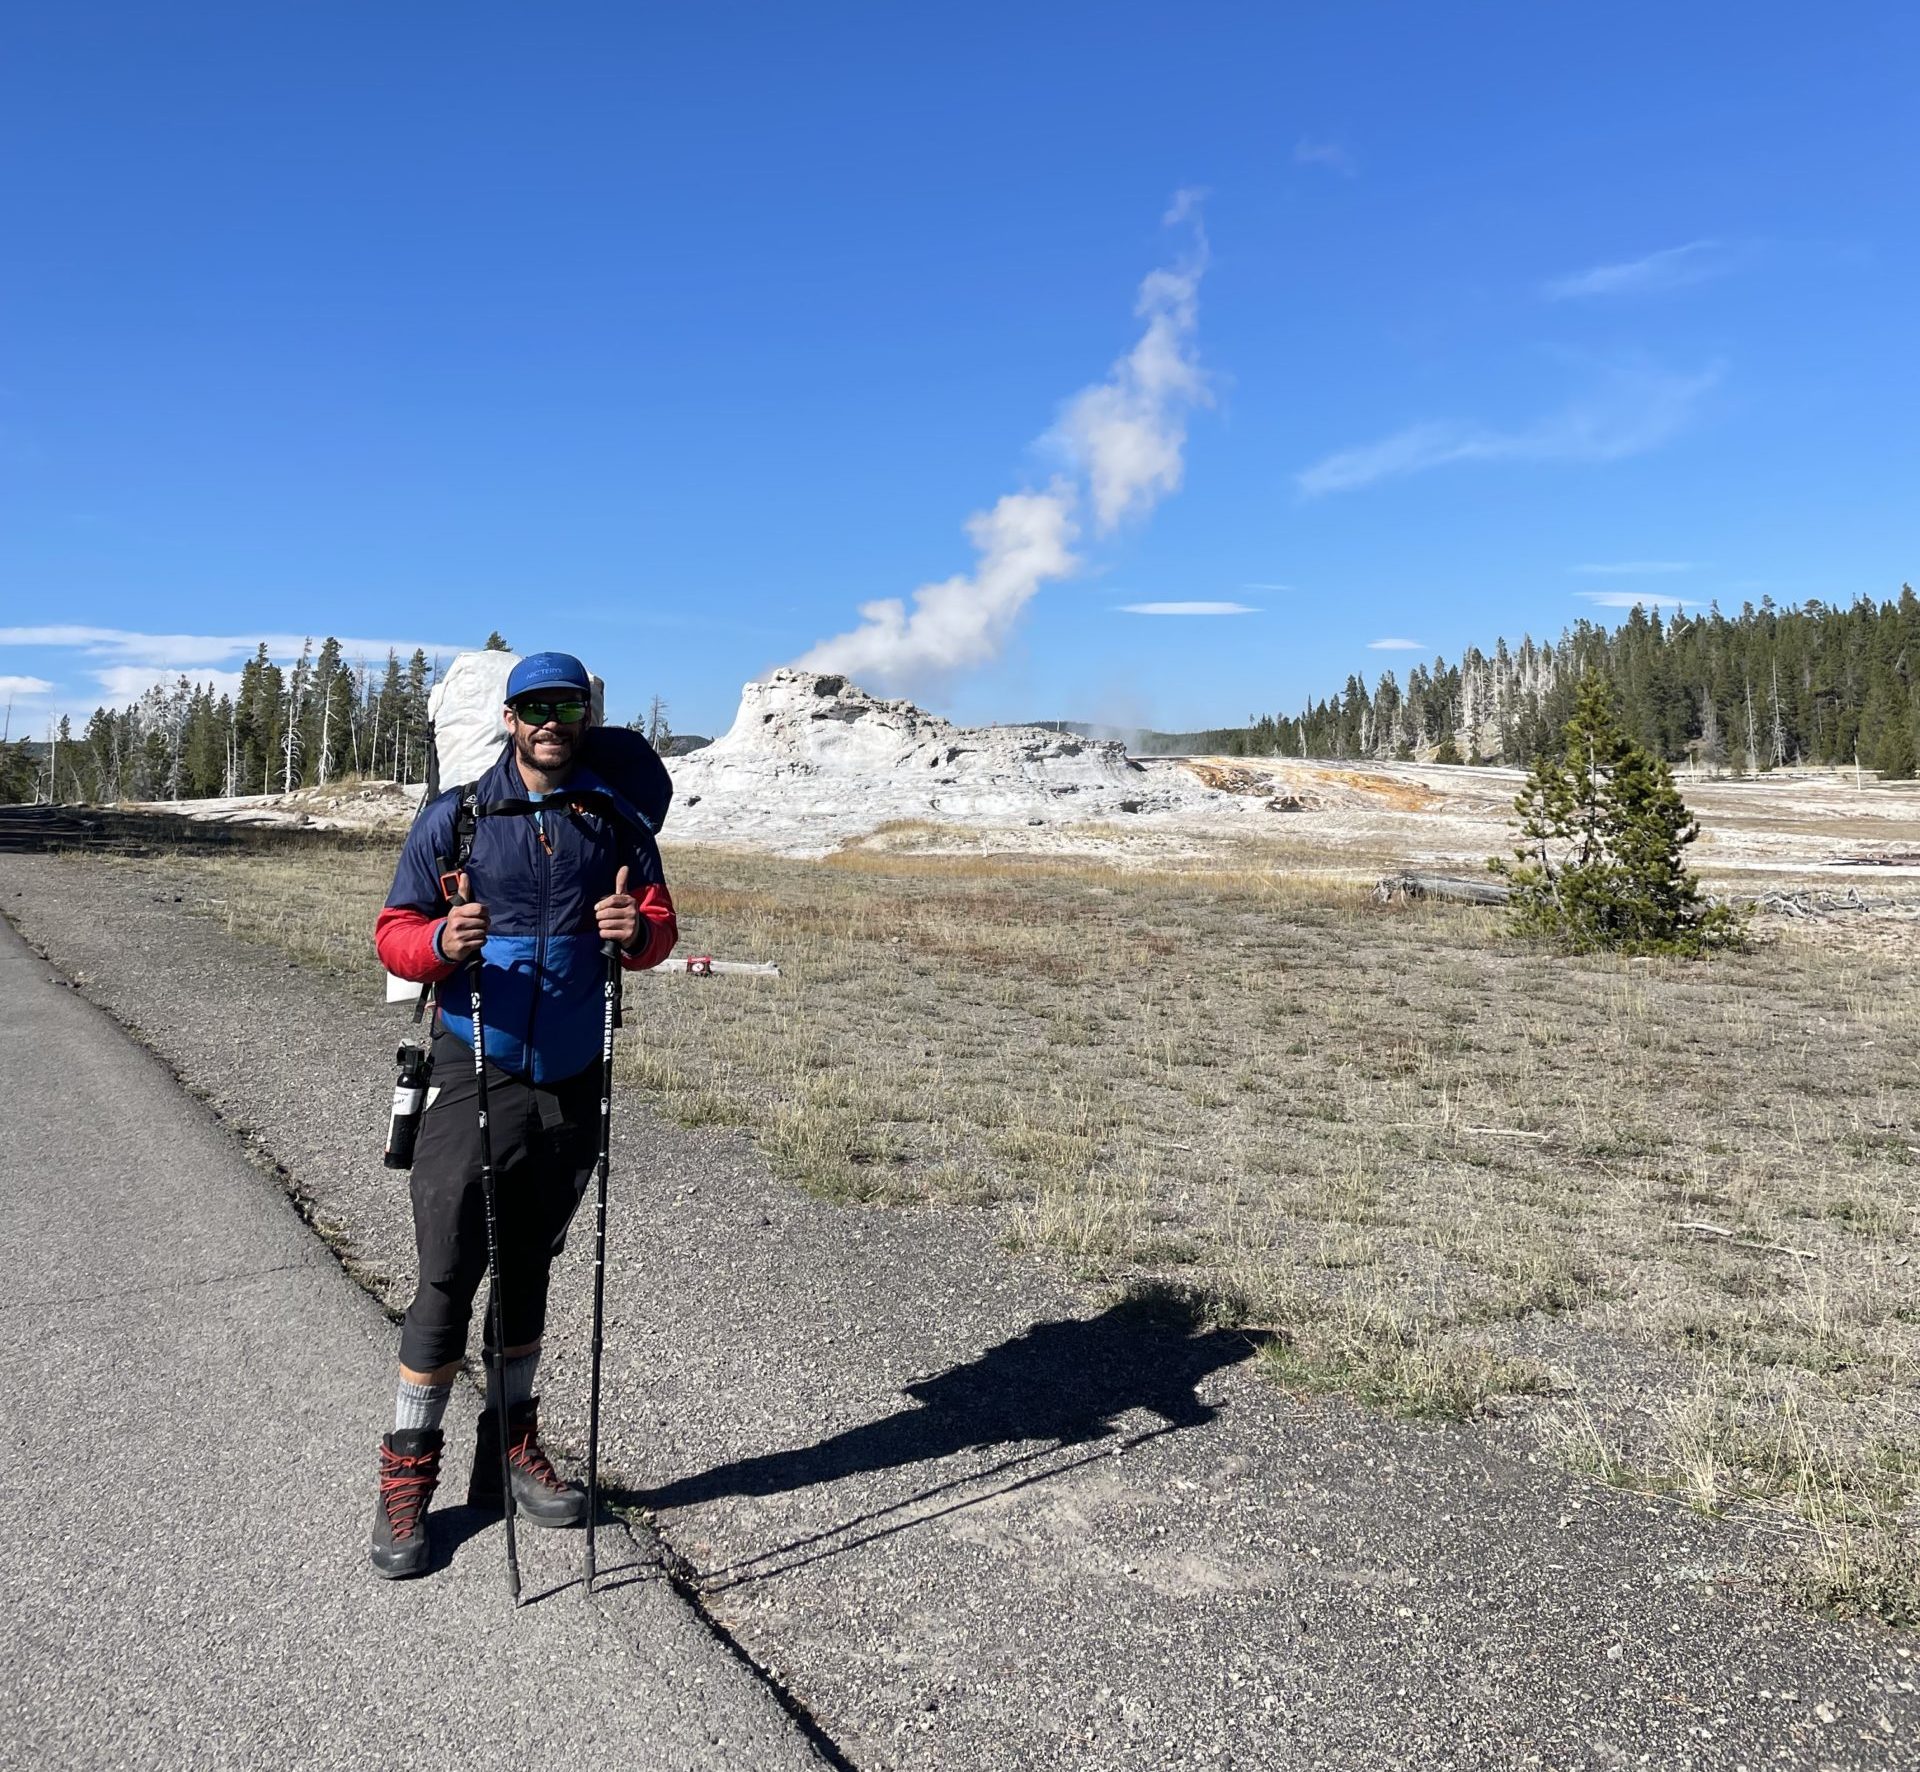 Elliot's Backpacking Trip through Yellowstone National Park